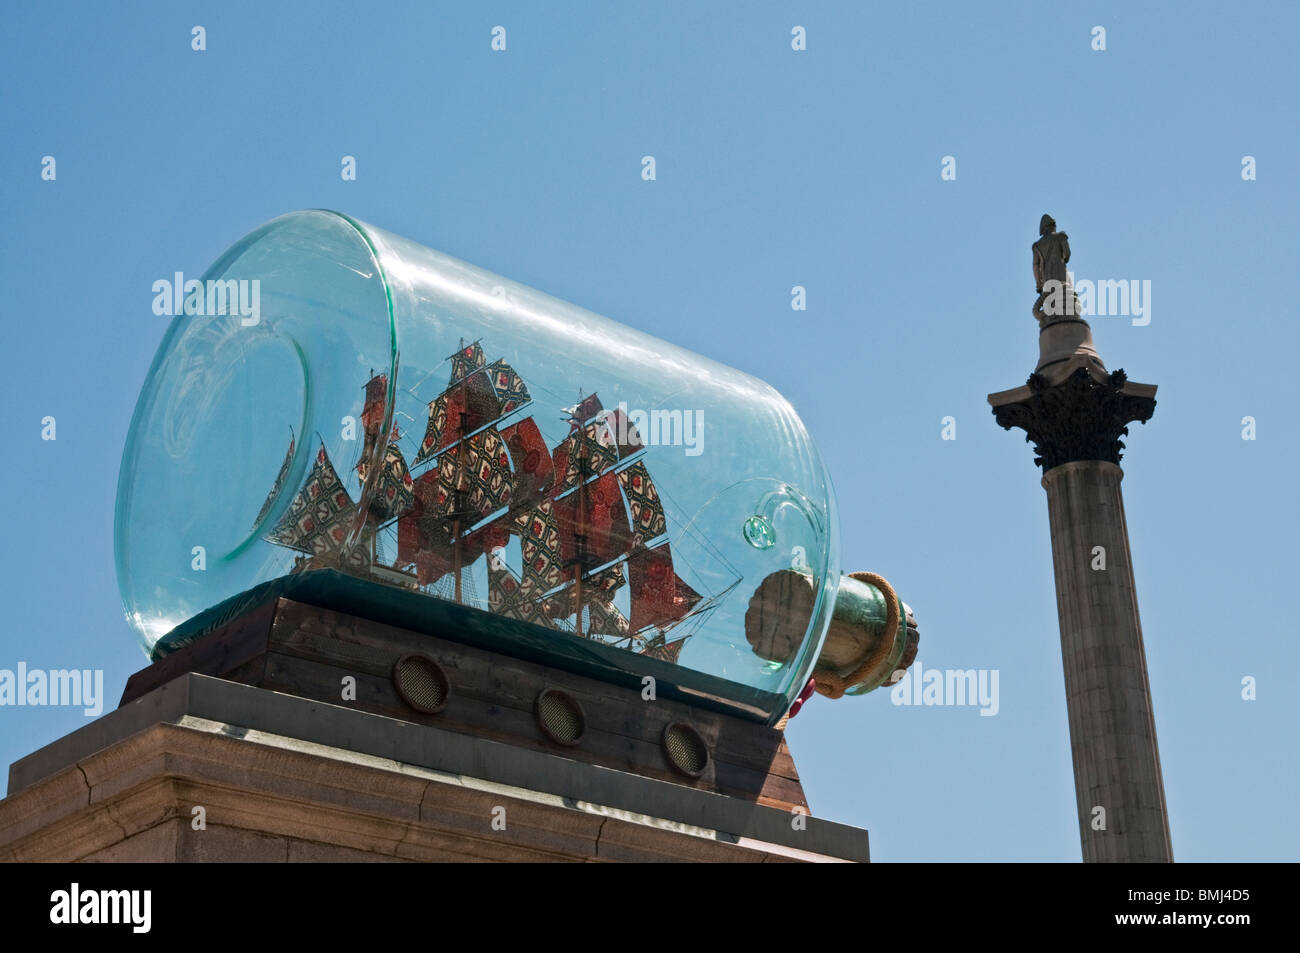 'Nelsons ship in a bottle' by Yinka Shonibare on the forth plinth,Trafalgar Square. Stock Photo